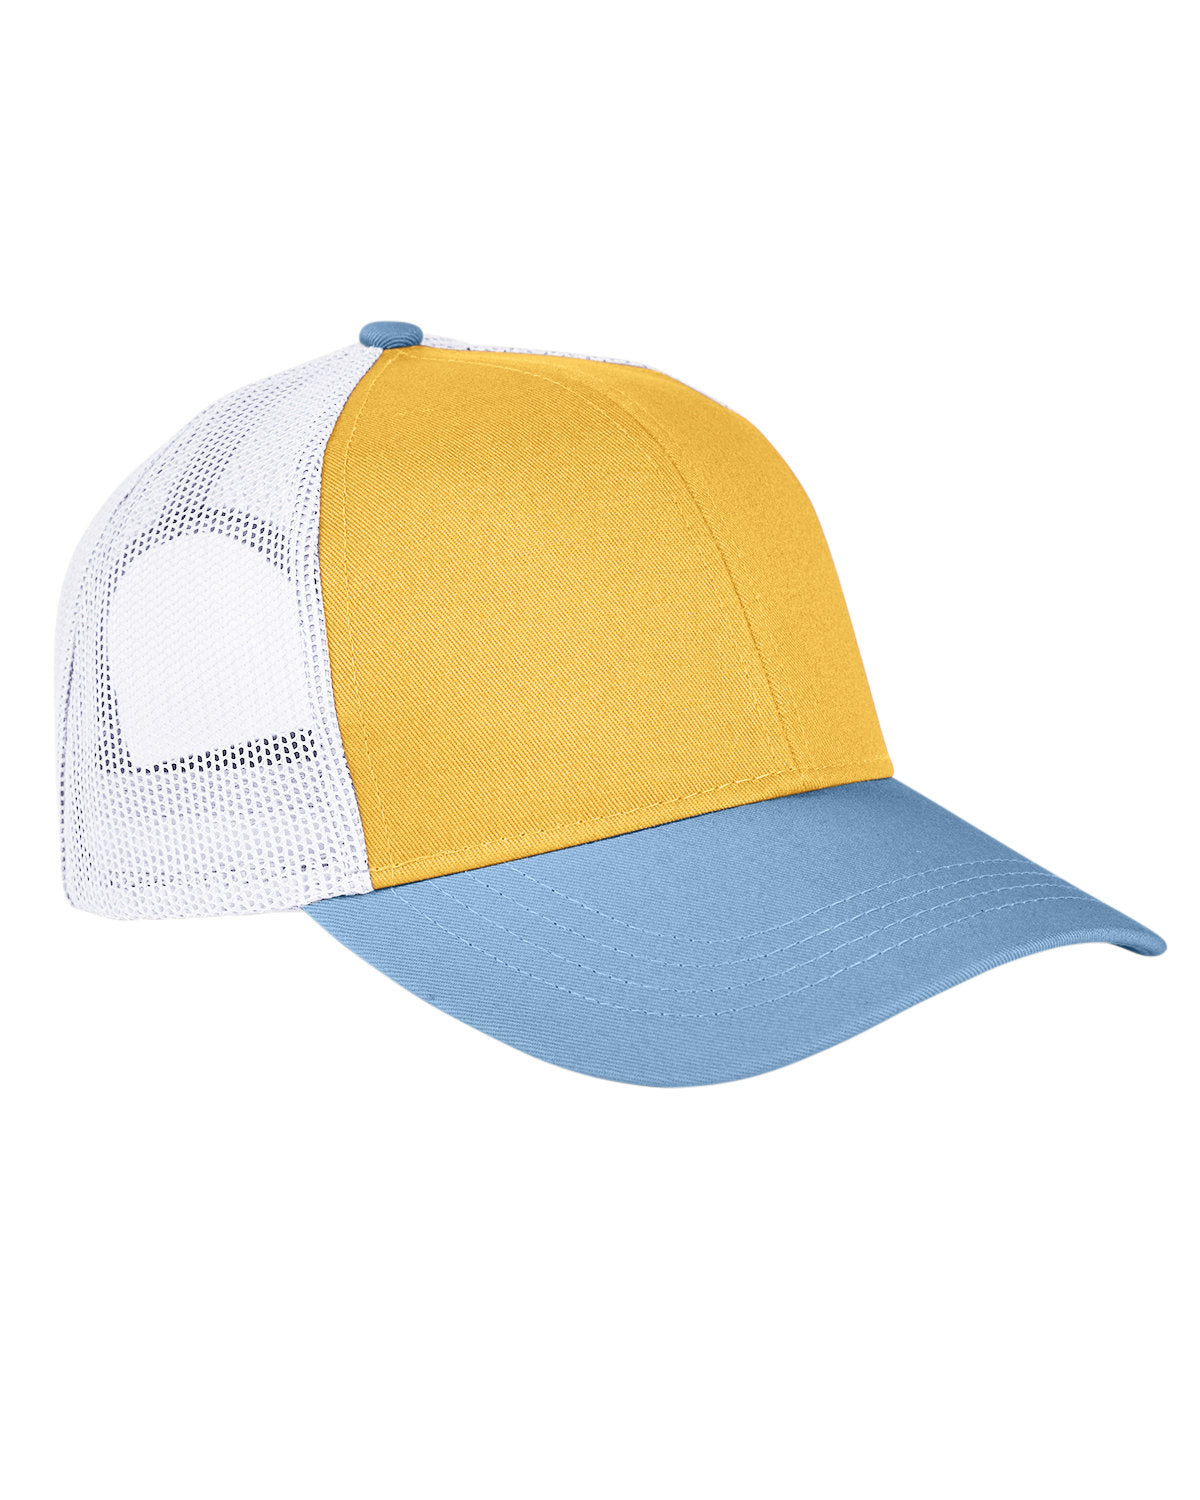 Headwear MUSTARD/ BAY/ WH OS Authentic Pigment